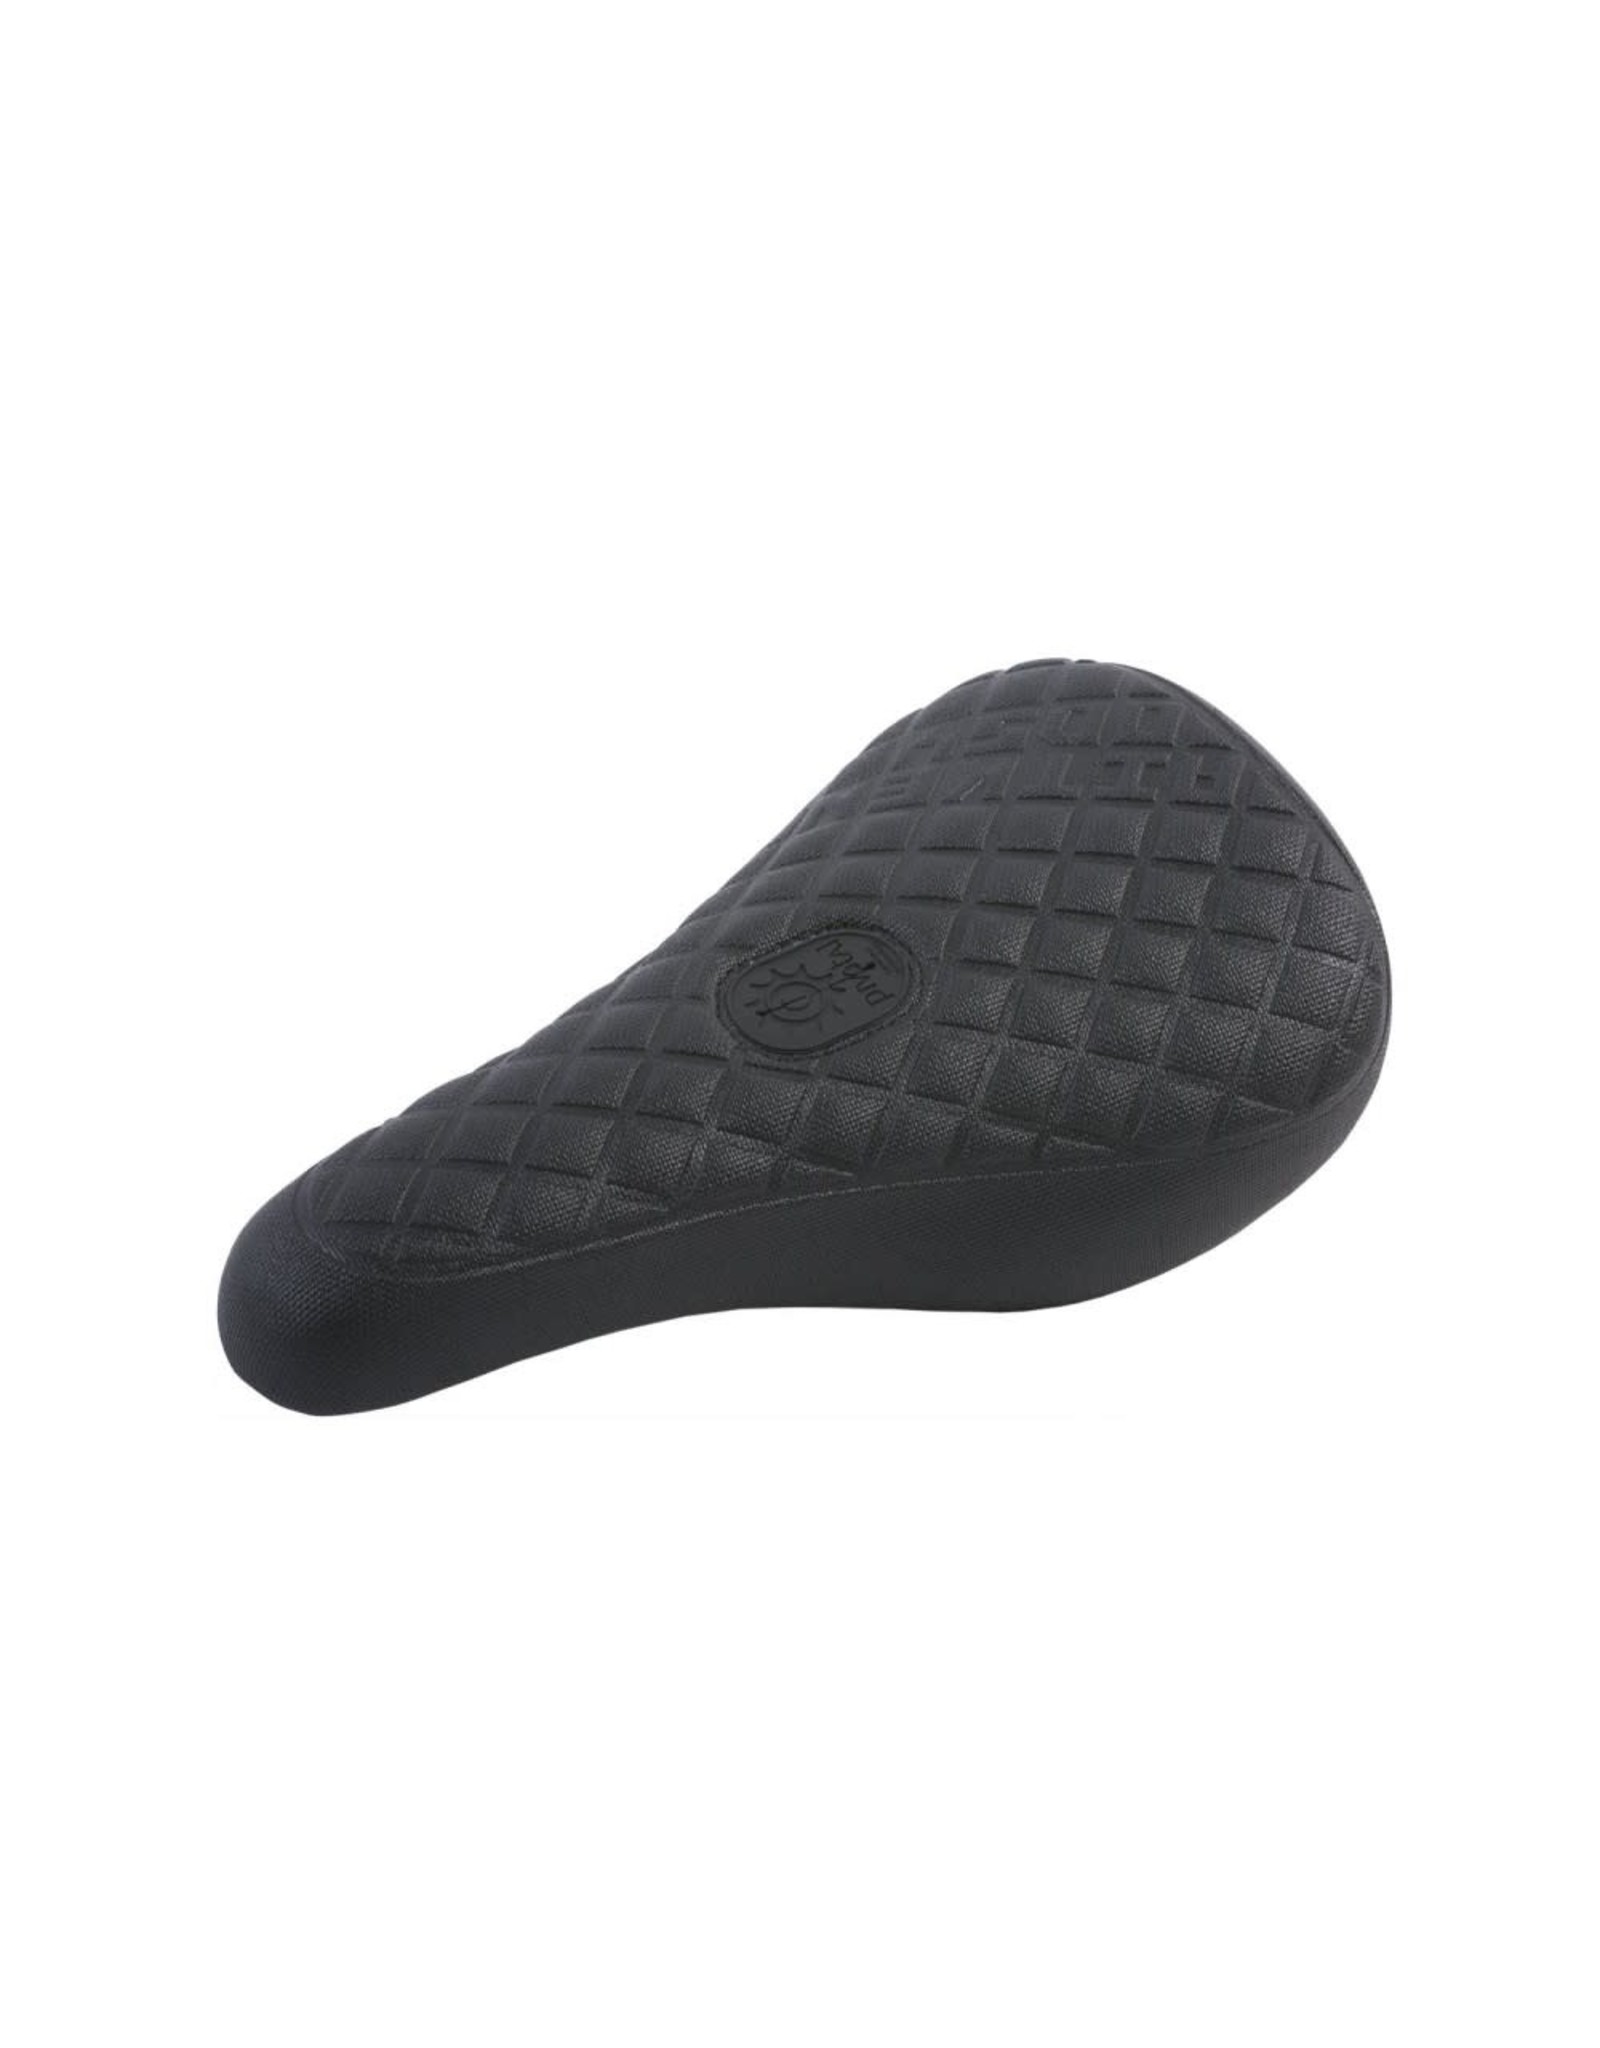 Odyssey ODYSSEY PIVOTAL MIKE AITKEN BMX SEAT QUILTED